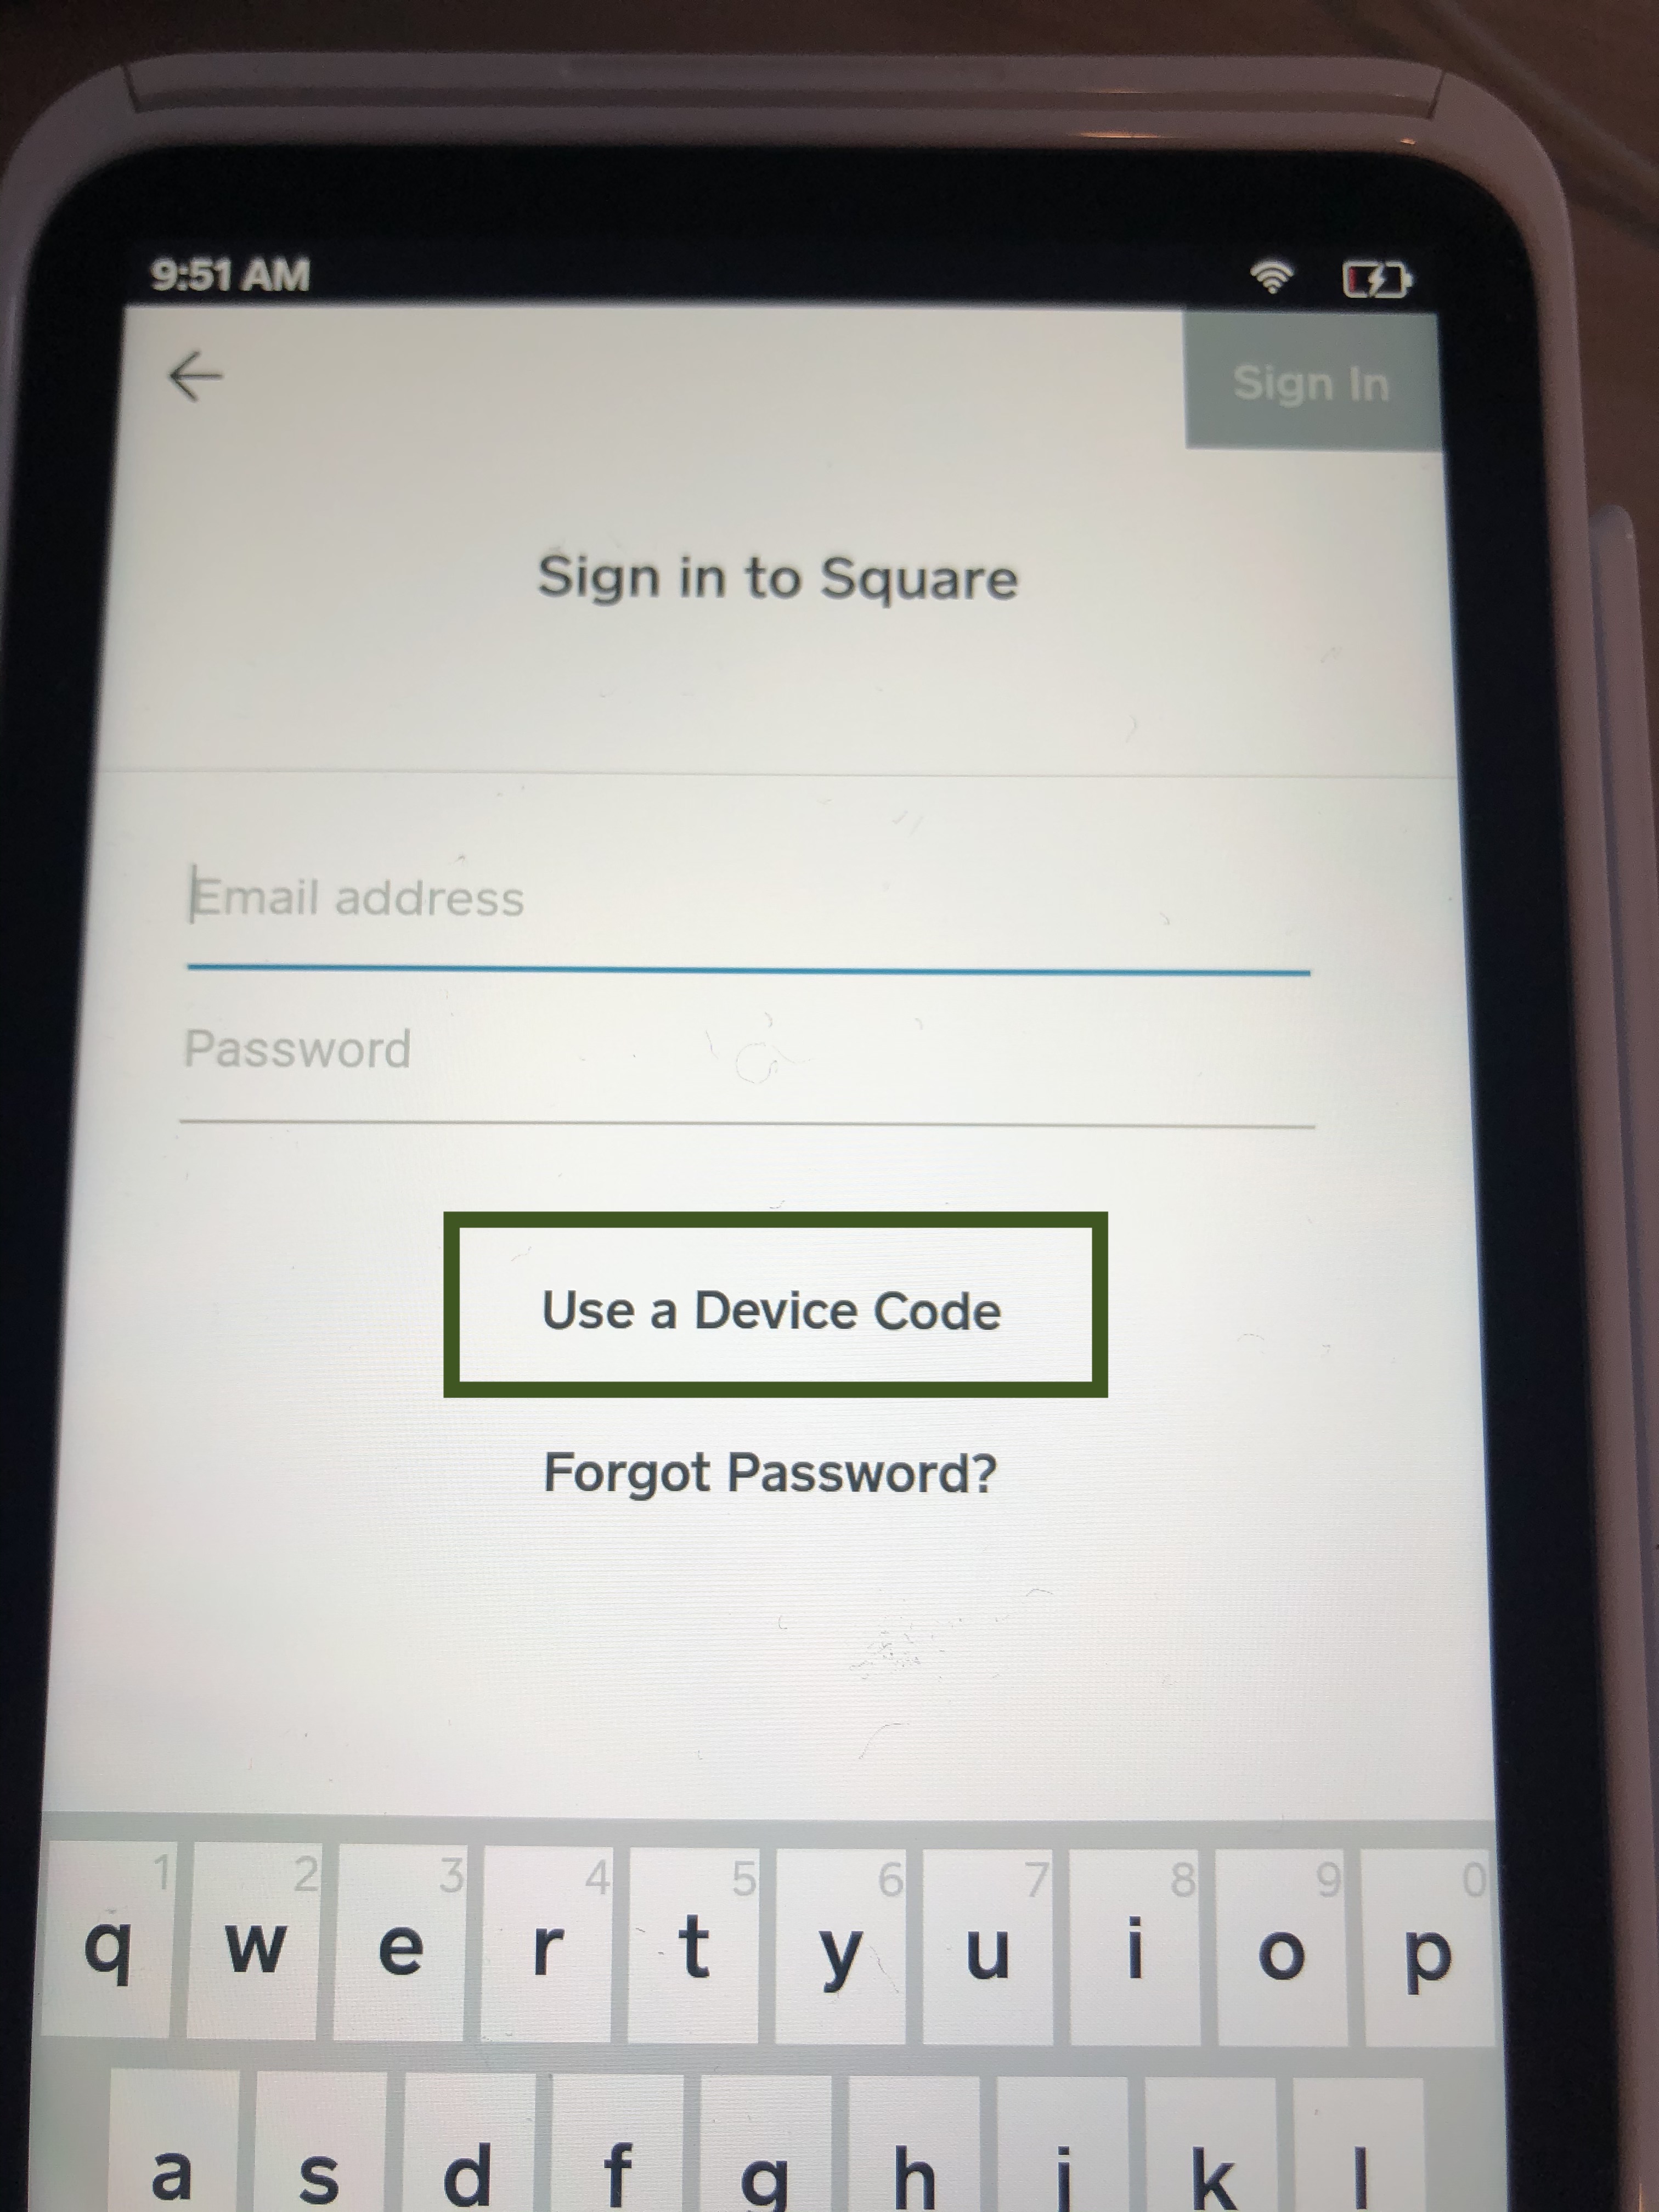 You will be presented with a Square login dialog. Click on the 'Use a device code' link